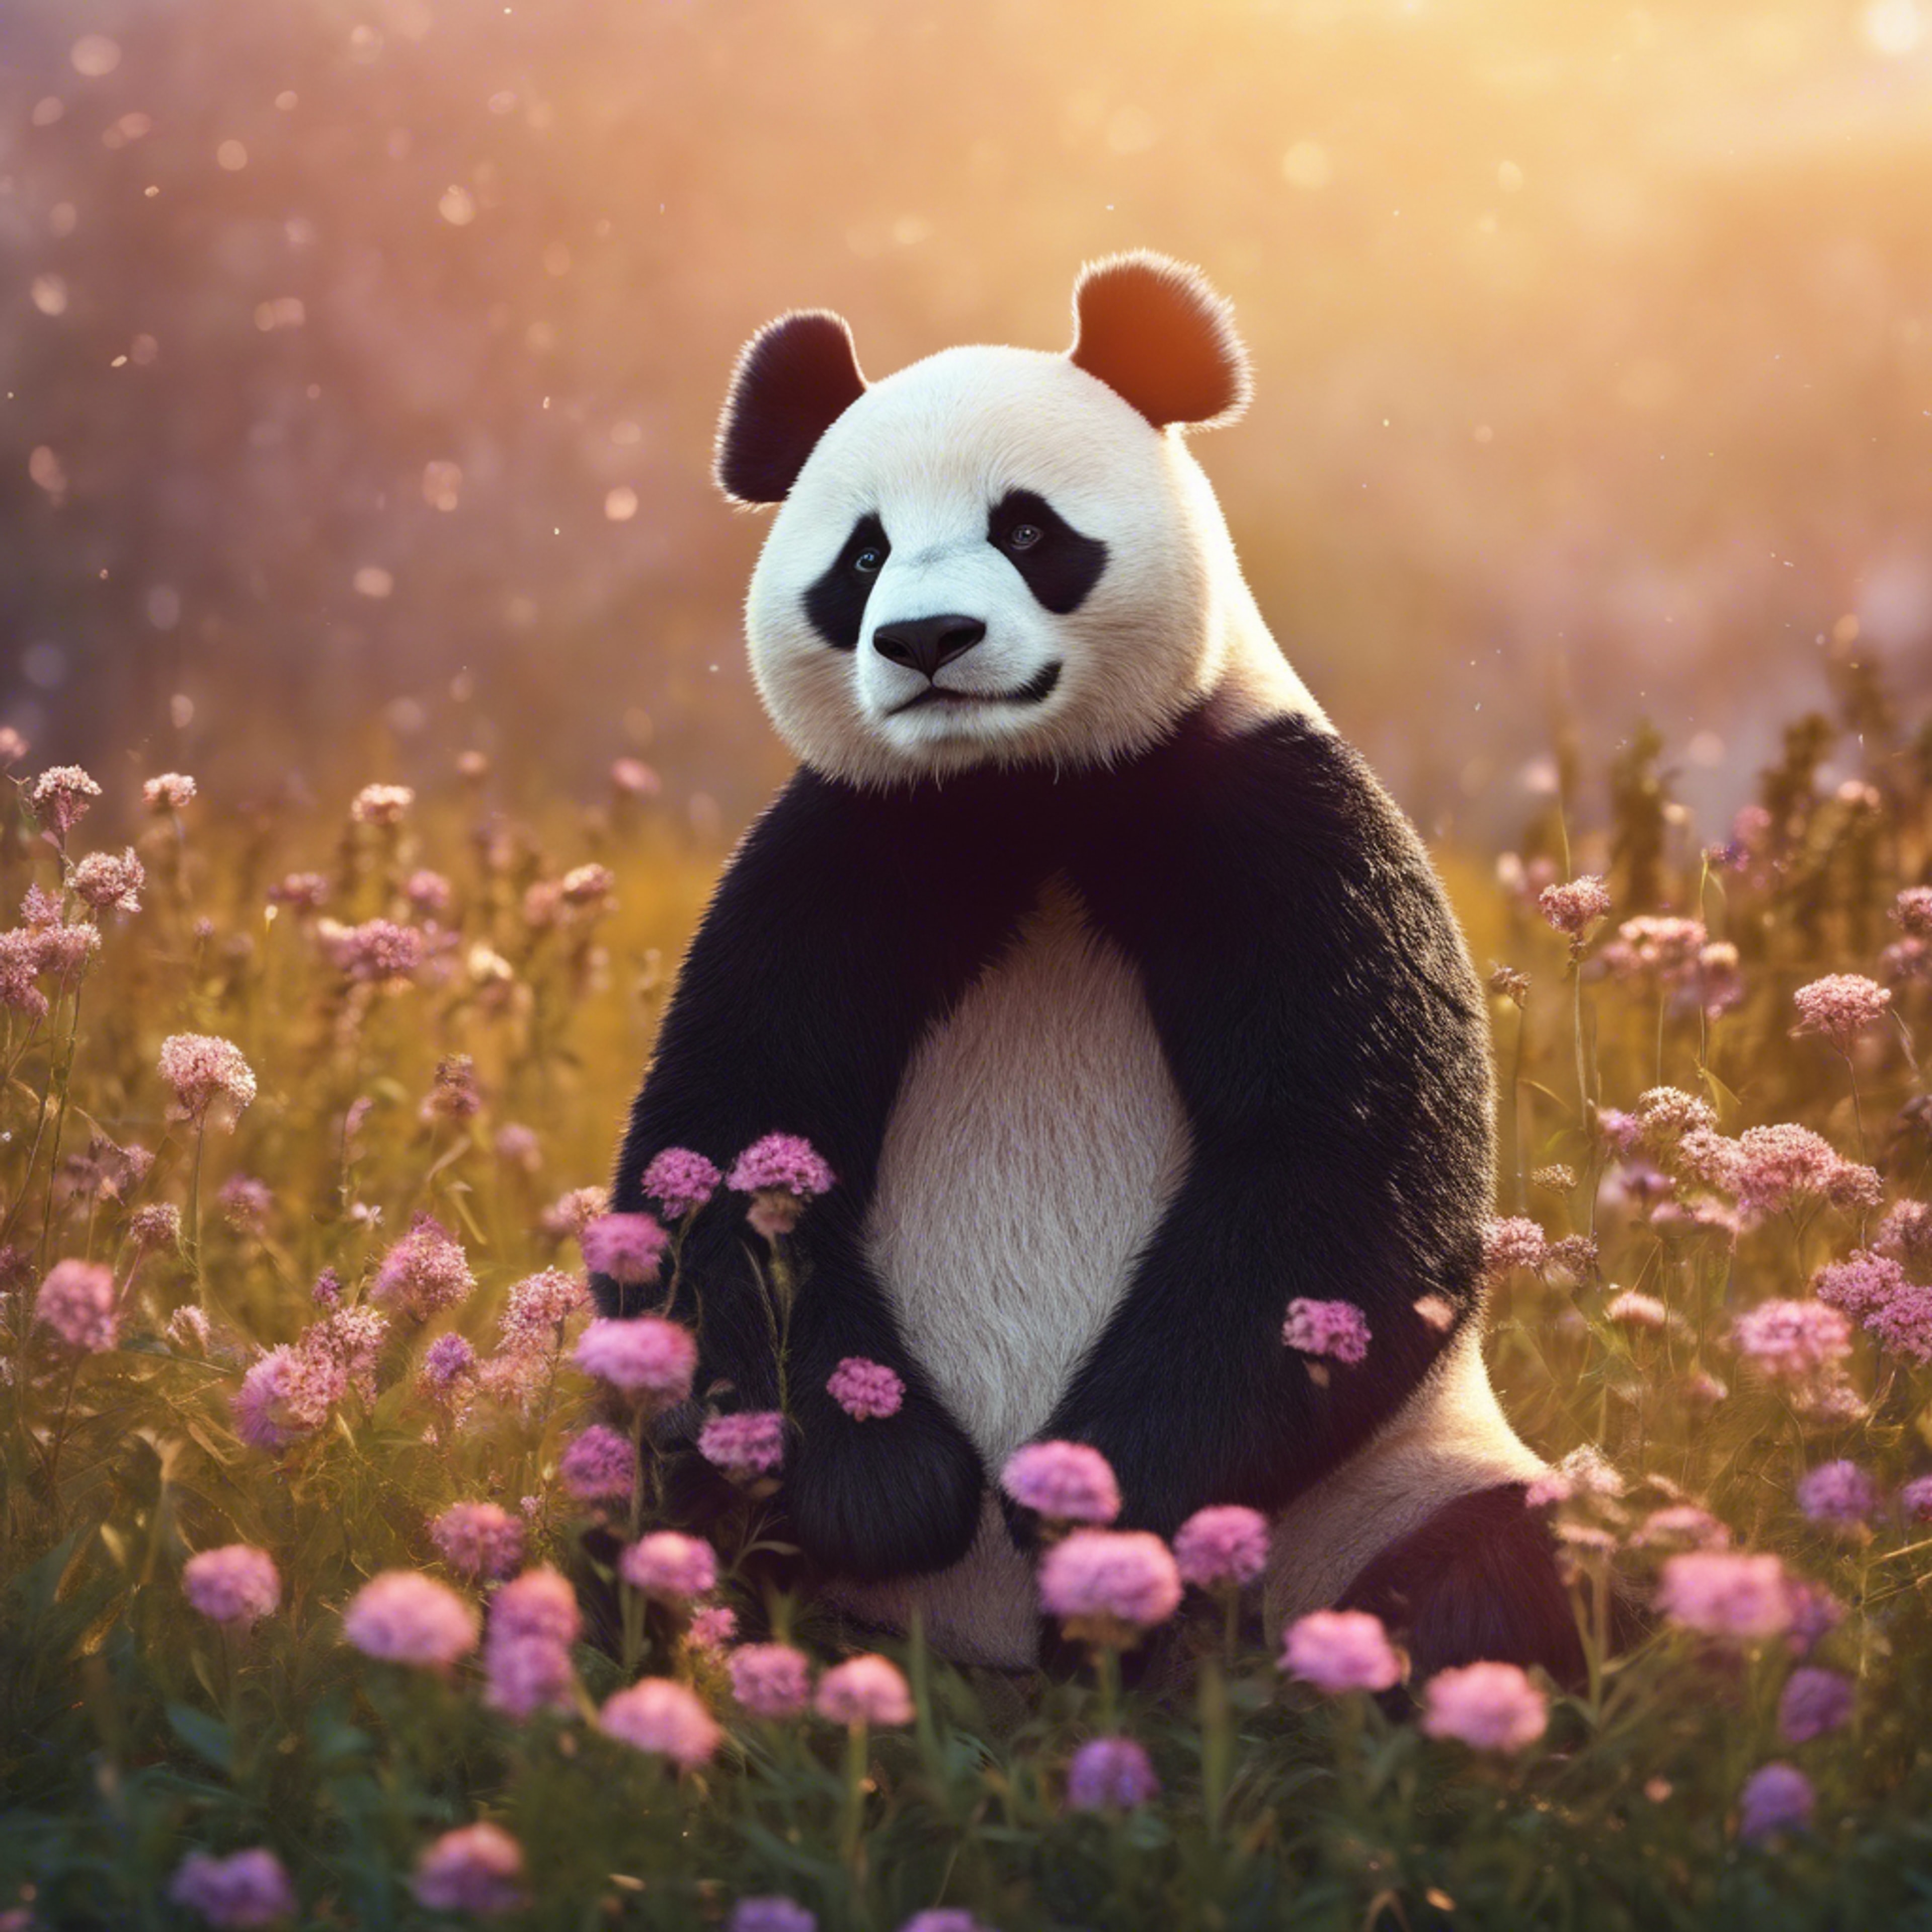 Beautiful illustration of a panda relaxing under the glow of the setting sun, surrounded by a field of wildflowers. Hình nền[4e88d1ee586942fa837d]